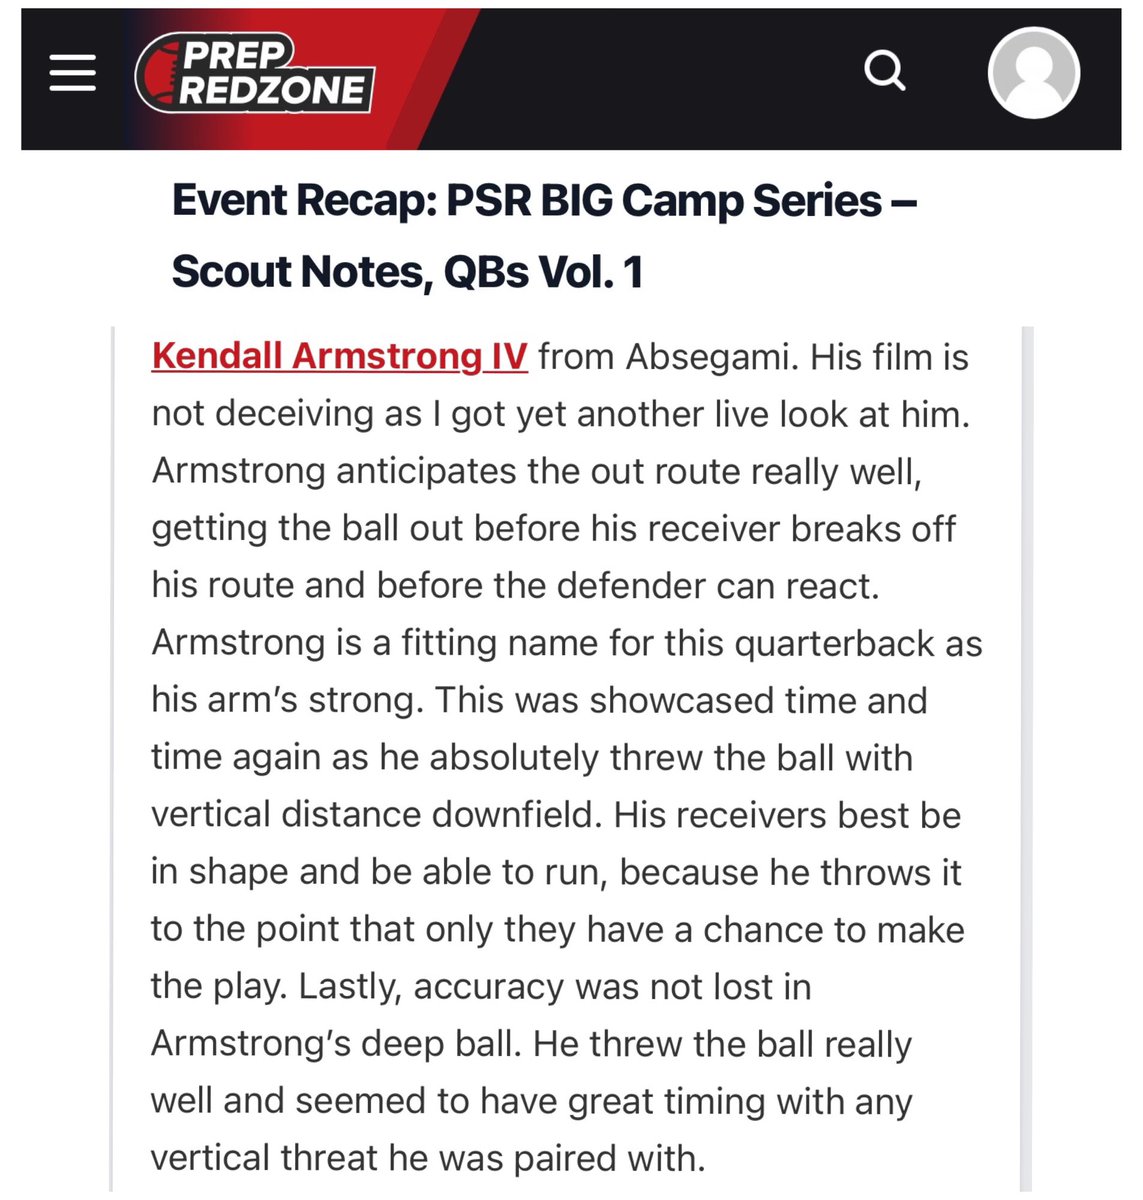 Thank you @BrendanScoutsNJ and @PrepRedzoneNJ for the kind words about my performance at the PSR Big Event and for recognizing me as one of the top QBs at the event. @ScoutNickP thank you for all you do to put on such a great event. Can’t wait for camp season. Time to work!!!